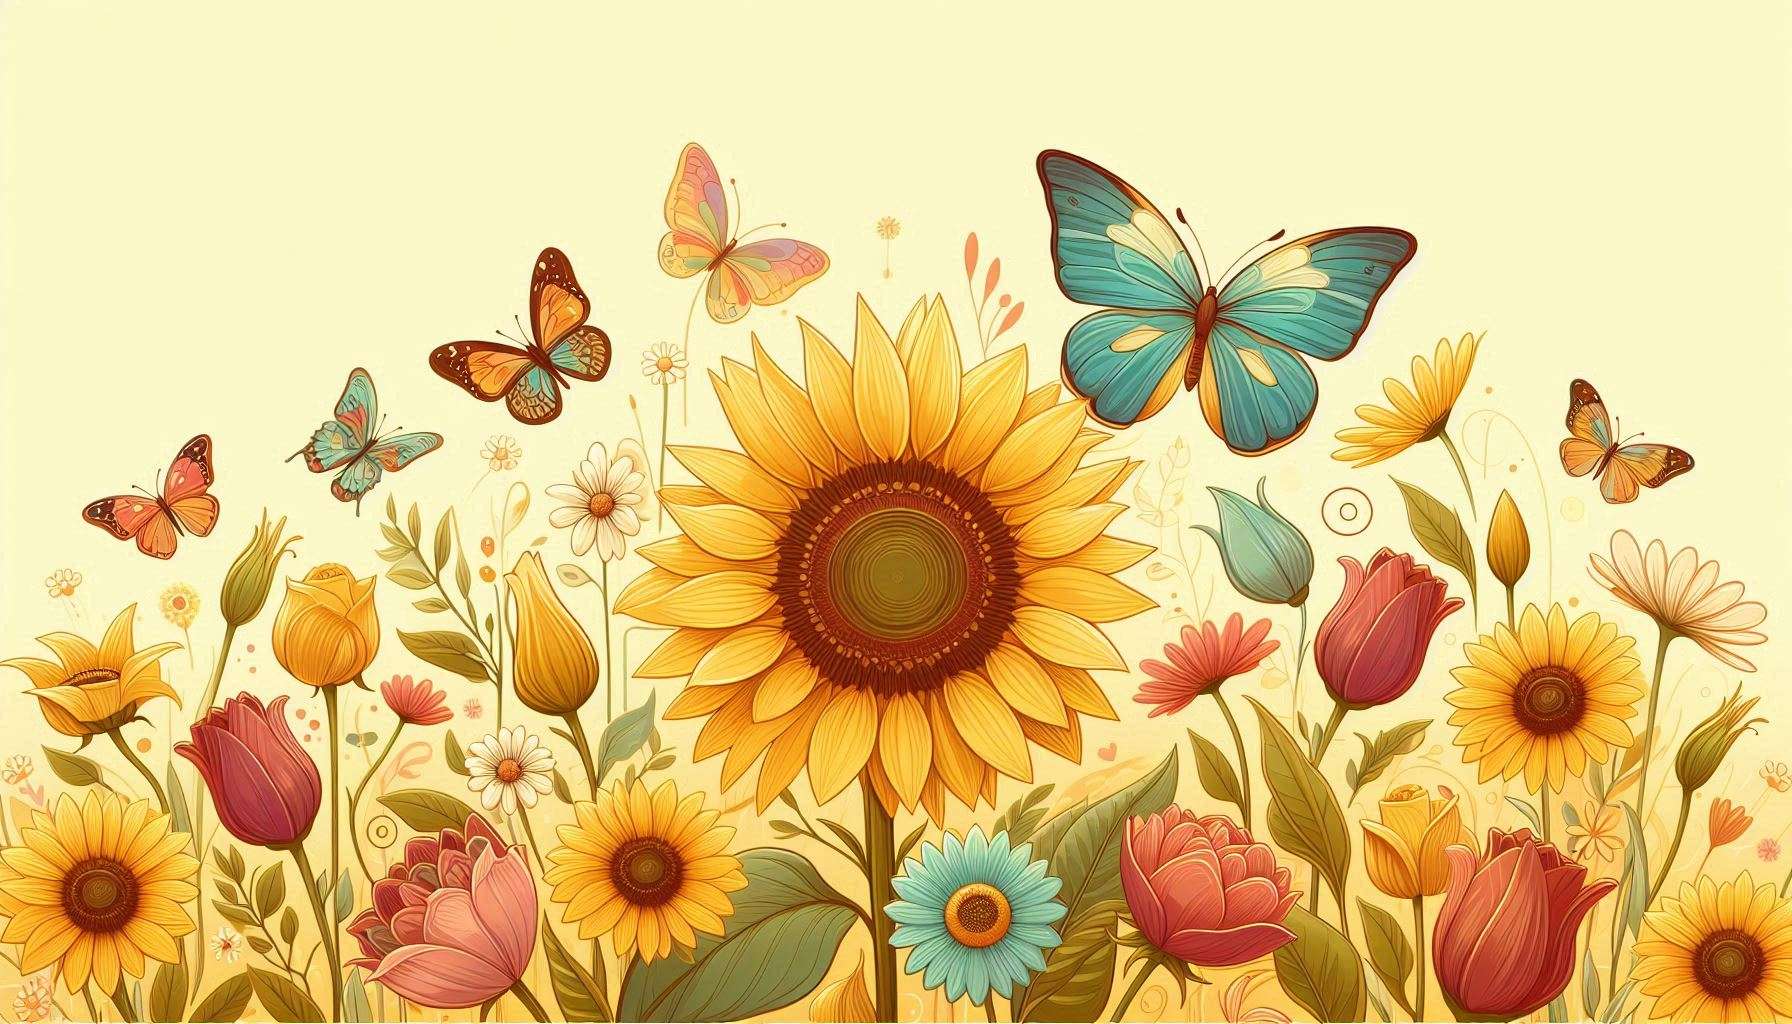 Download Free hd light yellow background with flower and butterfly for websites, slideshows, and designs | royalty-free and unlimited use.